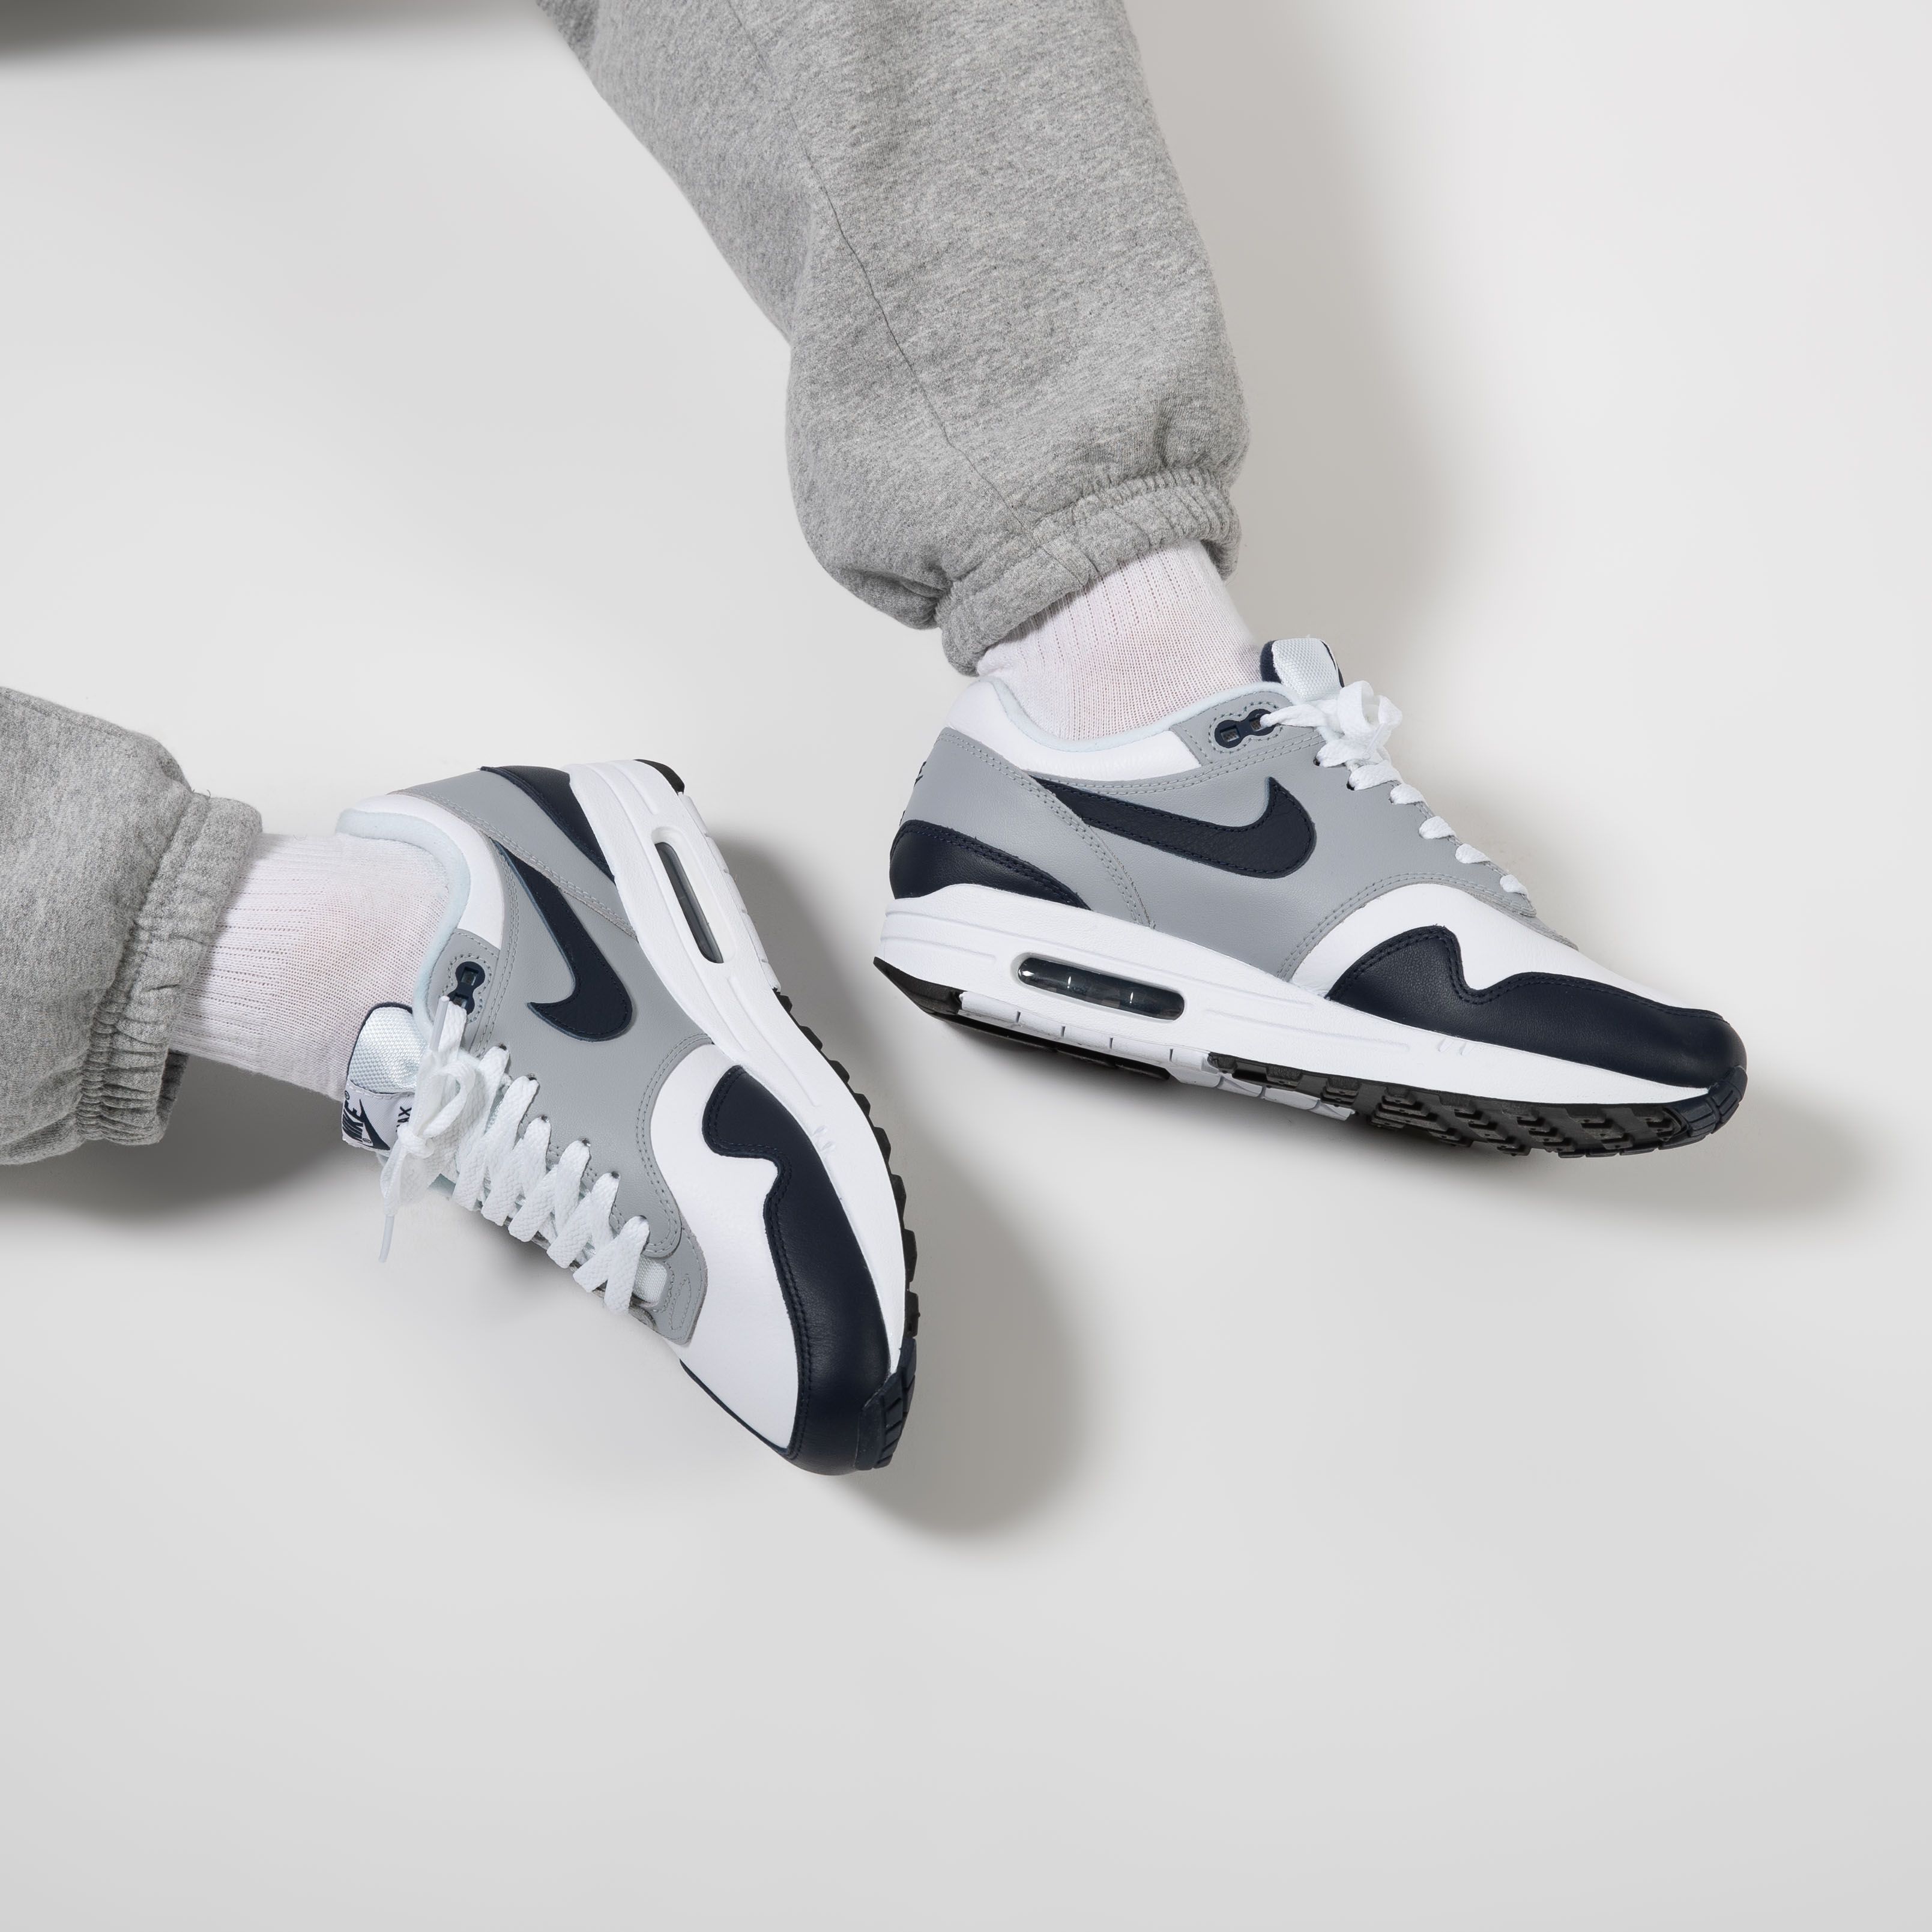 Titolo on X: out now 🔥 Nike Air Max 1 Lv8 Obsidian are